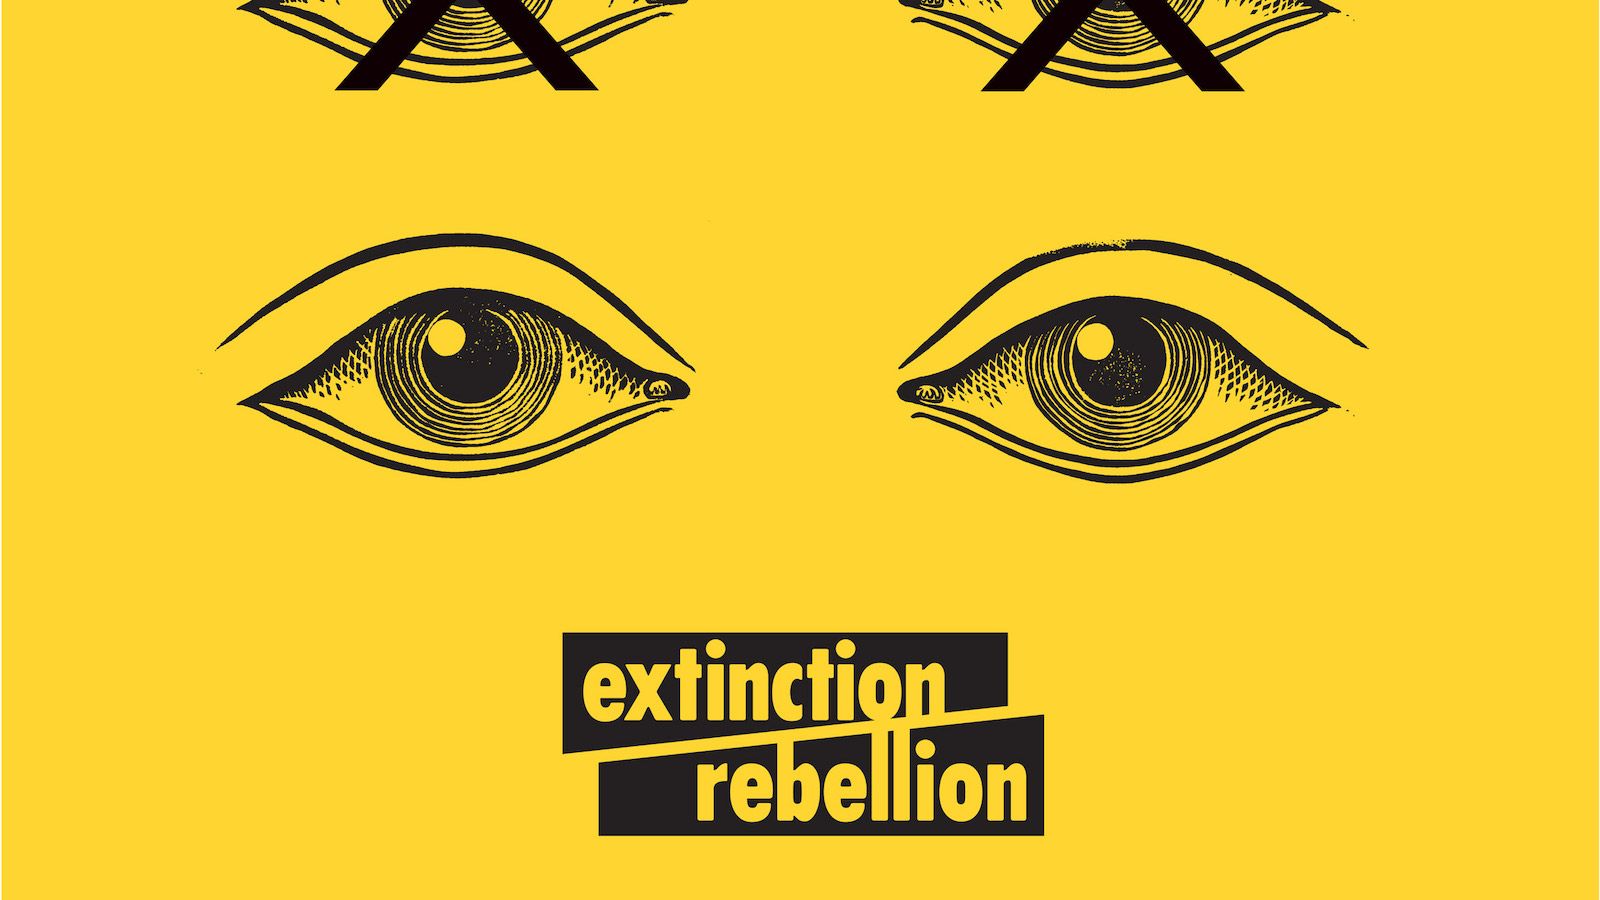 The Extinction Rebellion Call The Advertising Industry To Change